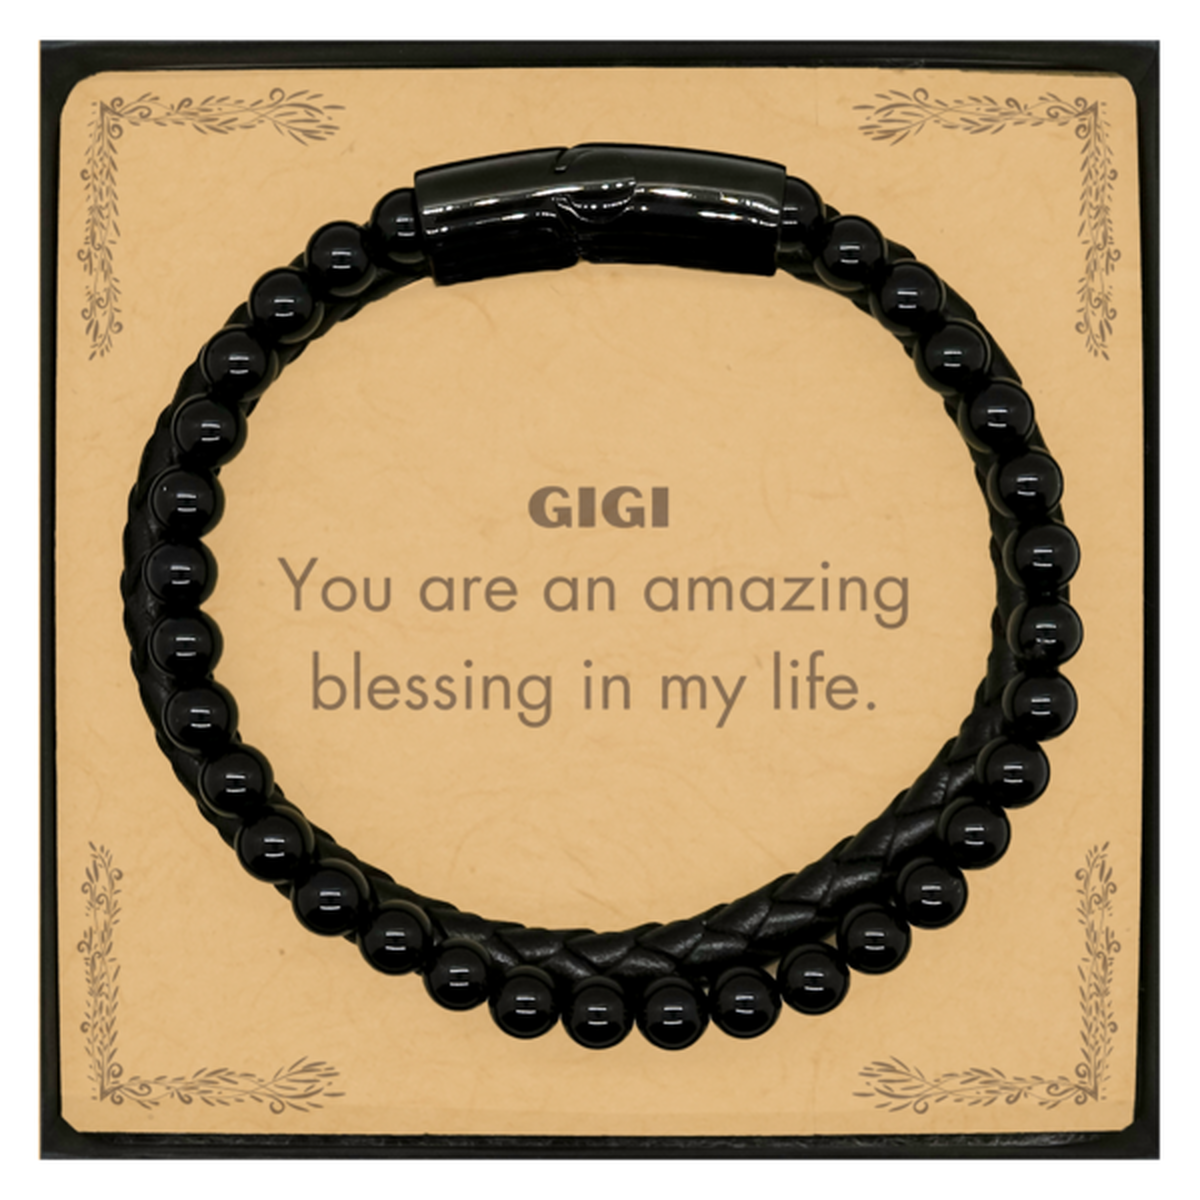 Gigi Stone Leather Bracelets, You are an amazing blessing in my life, Thank You Gifts For Gigi, Inspirational Birthday Christmas Unique Gifts For Gigi